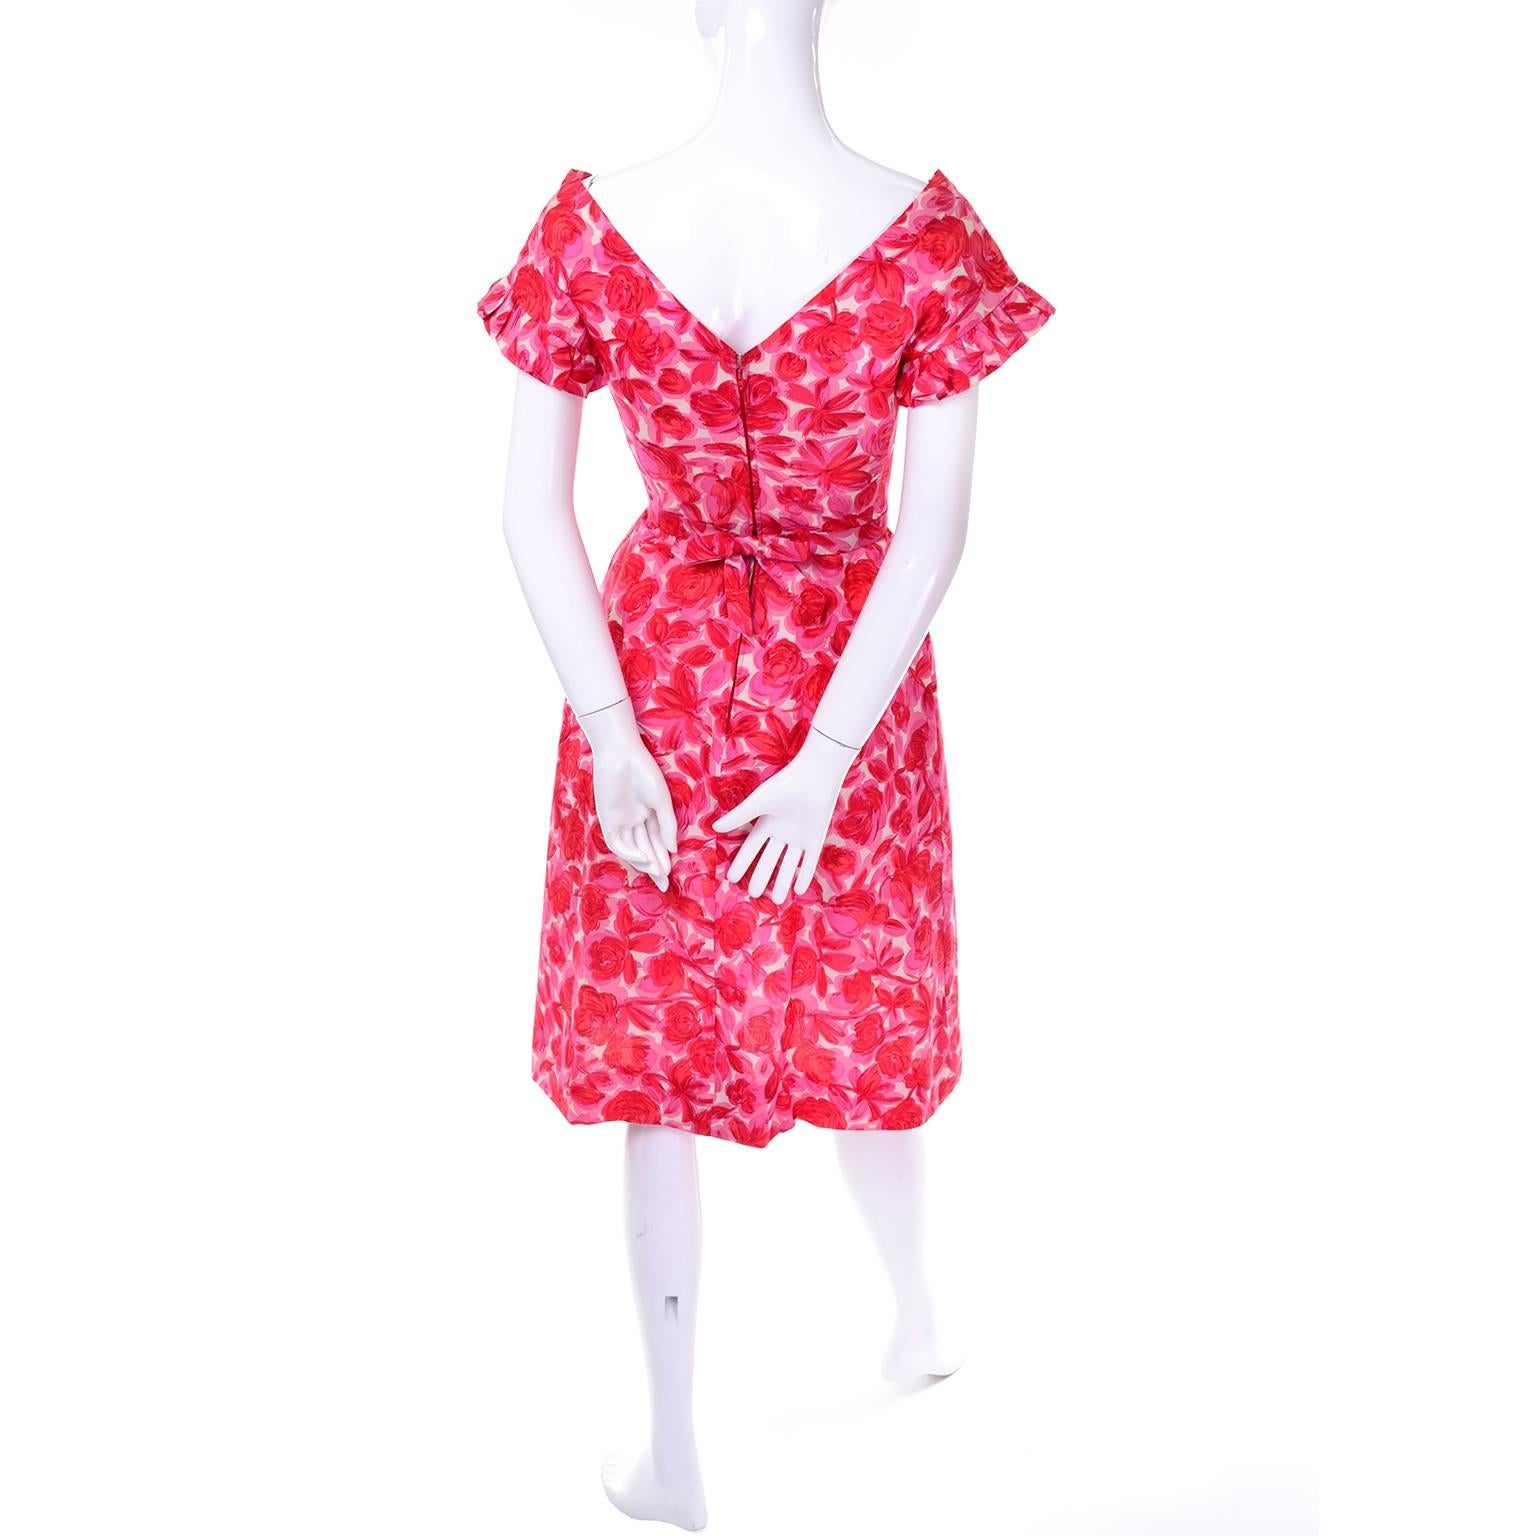 This pretty vintage pink floral silk dress has no label but is exquisitely designed and very well made. The bodice has a faux pinafore look with pretty pleats and there is an attached fabric sash that snaps closed with a bow in the back. The dress